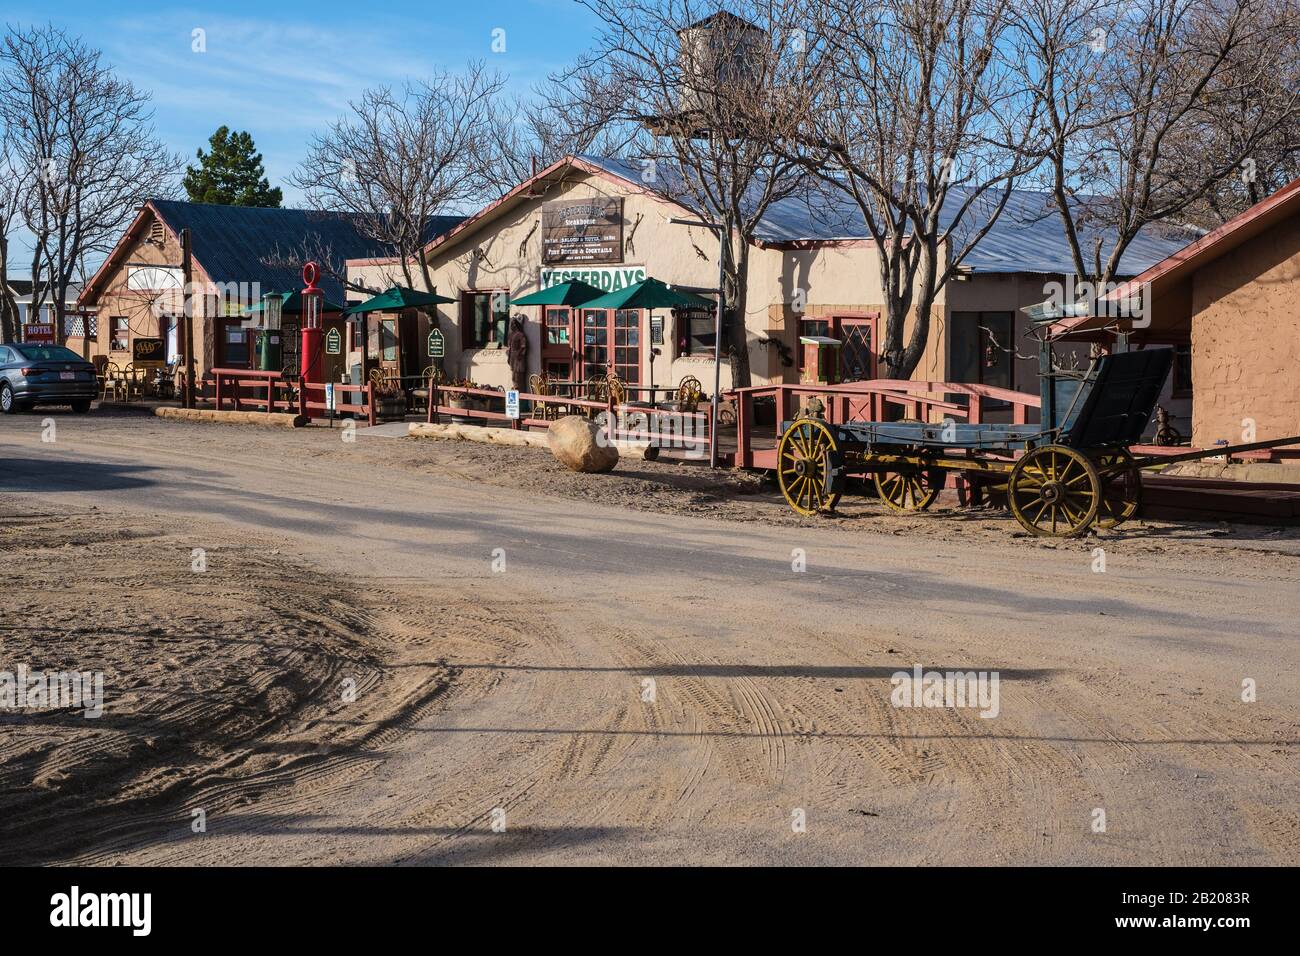 Shep's Miners Inn & Yesterdays Restaurant, Chloride, Arizona, 86431, USA. The oldest continuously inhabited mining town in United States, Stock Photo